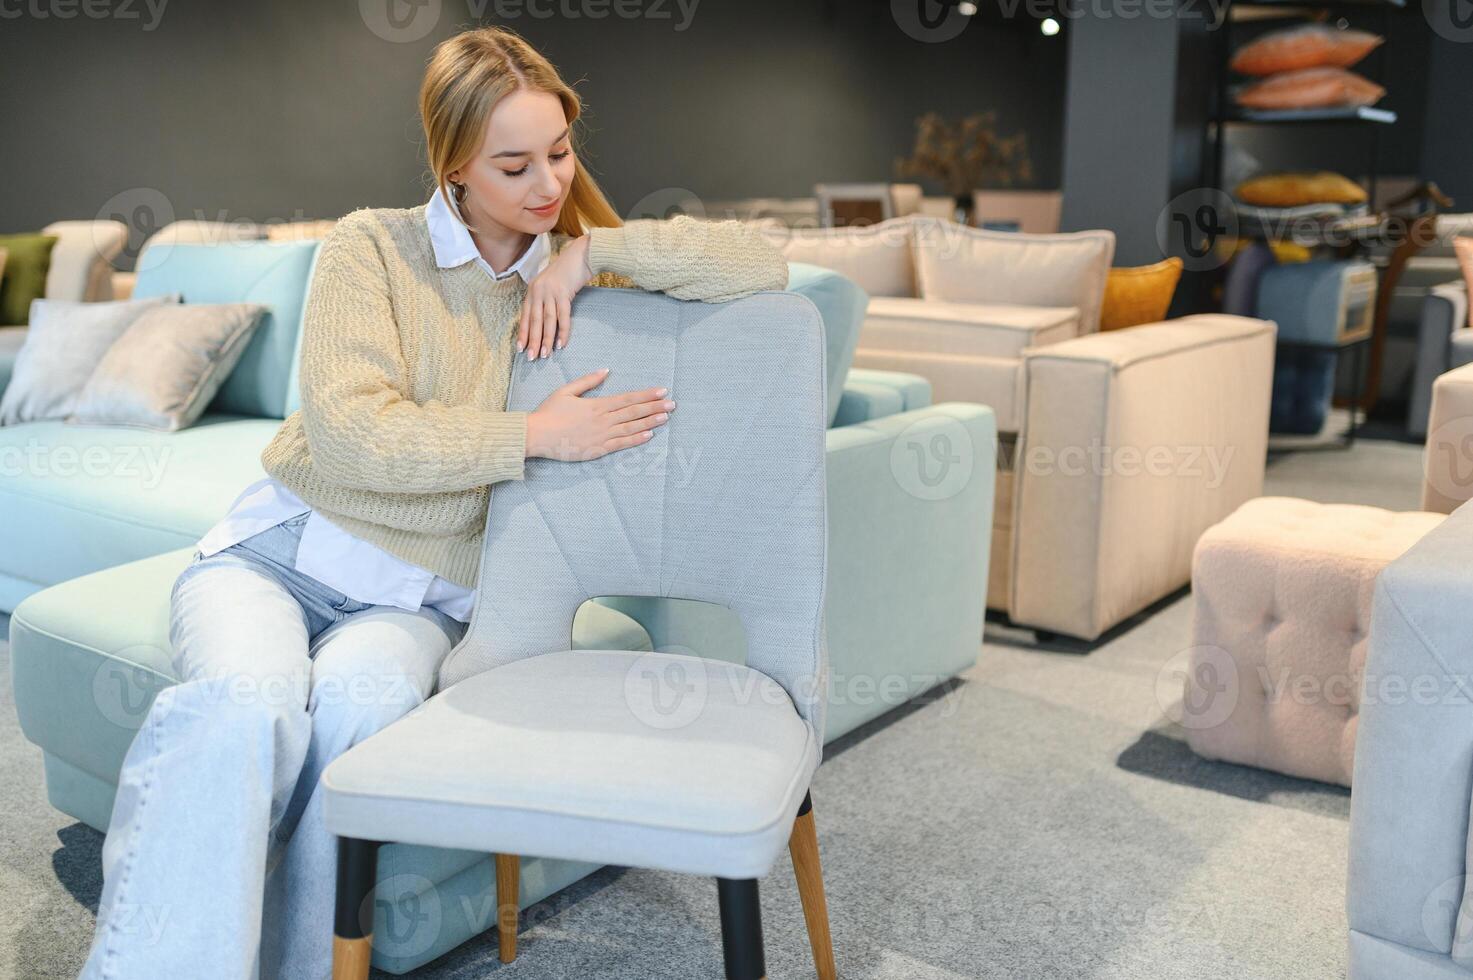 A young woman chooses chairs for the home in a store. photo